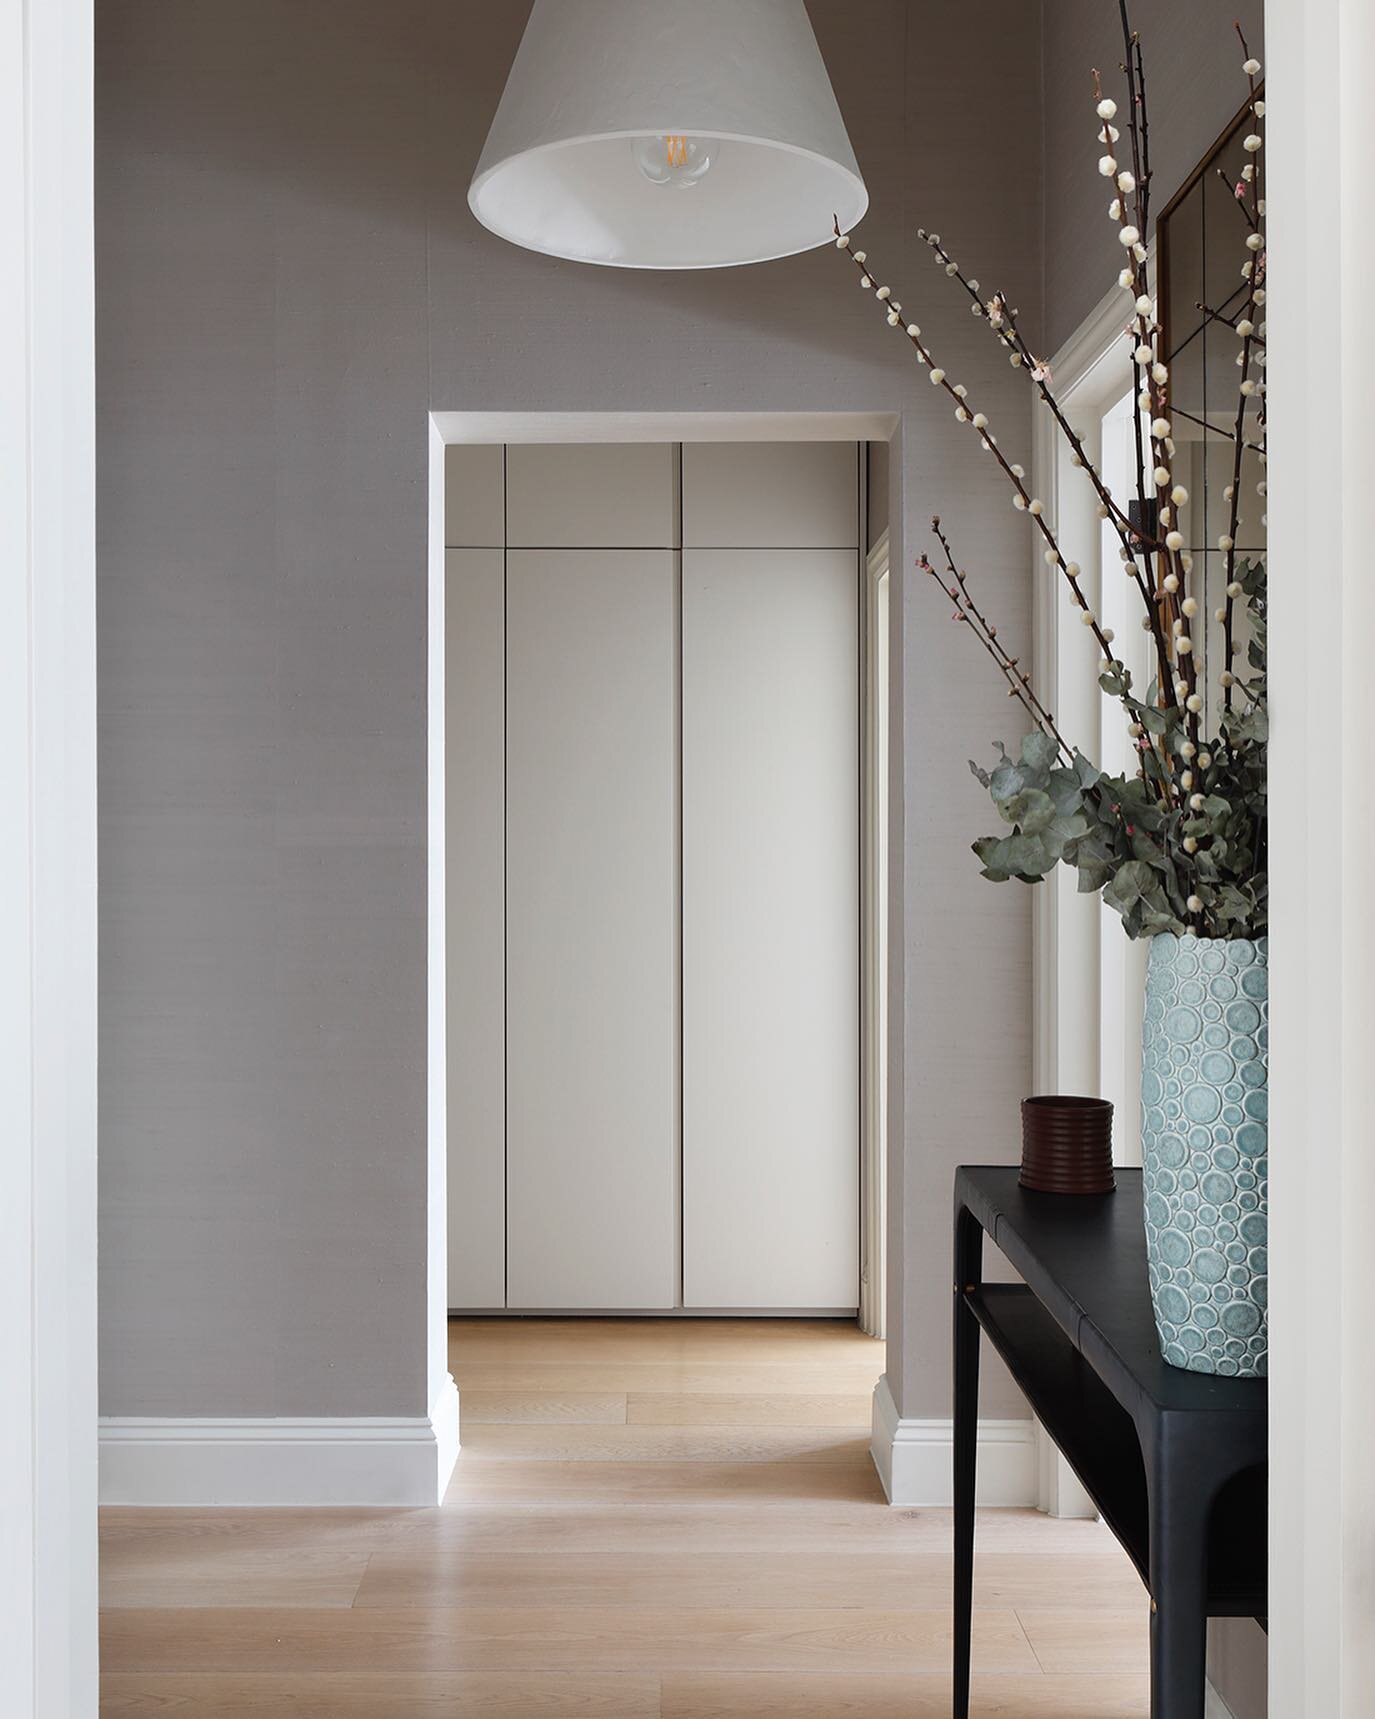 It may be small, but this entrance hall packs a punch. The silk wall covering adds warmth and contrasts with the pale oak flooring. An over scaled plaster pendant light, leather console table and antique mirror are the focal points upon entering the 